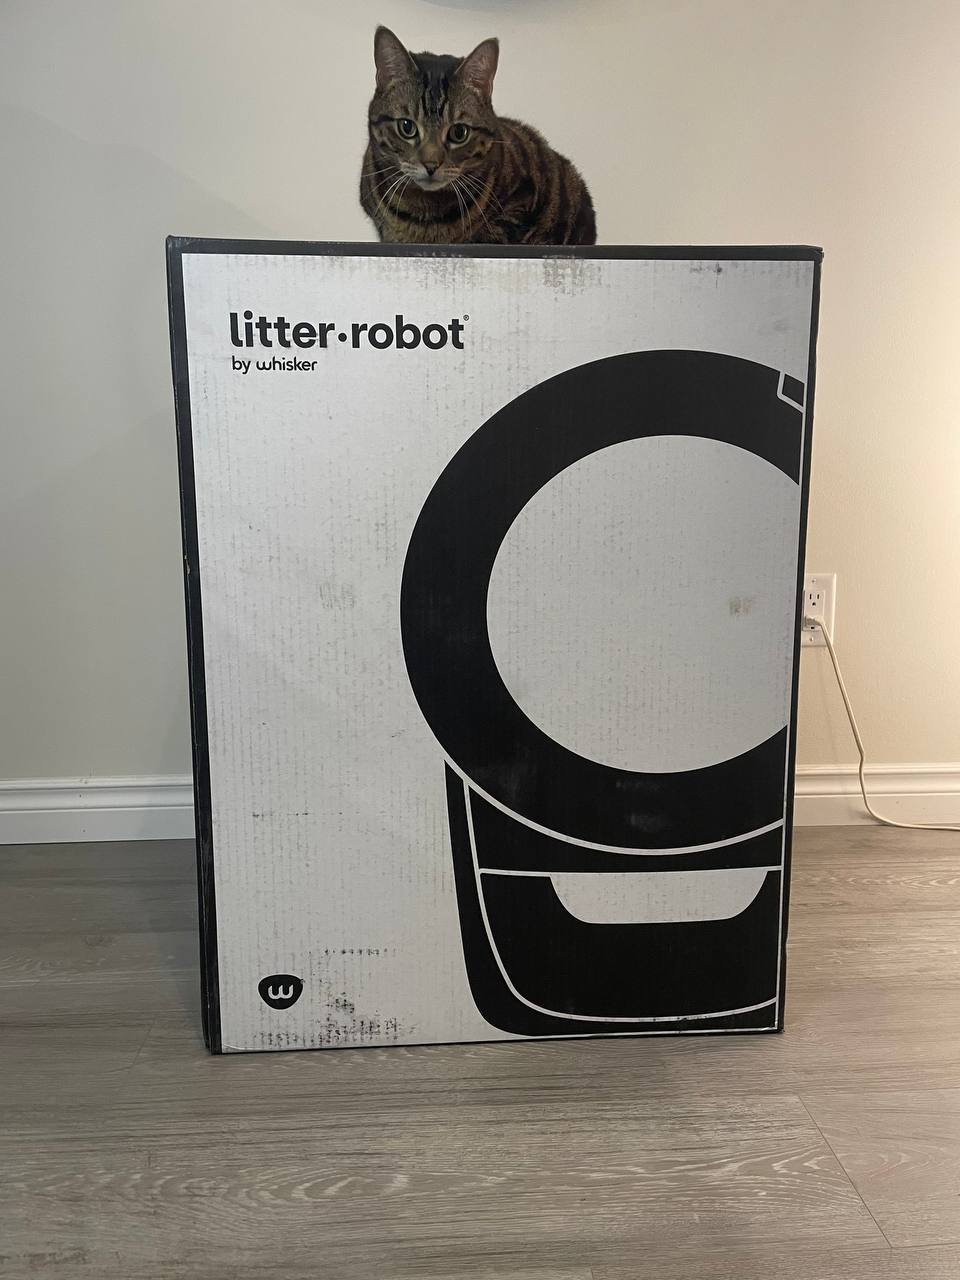 My cat on top of the Litter Robot 4 box